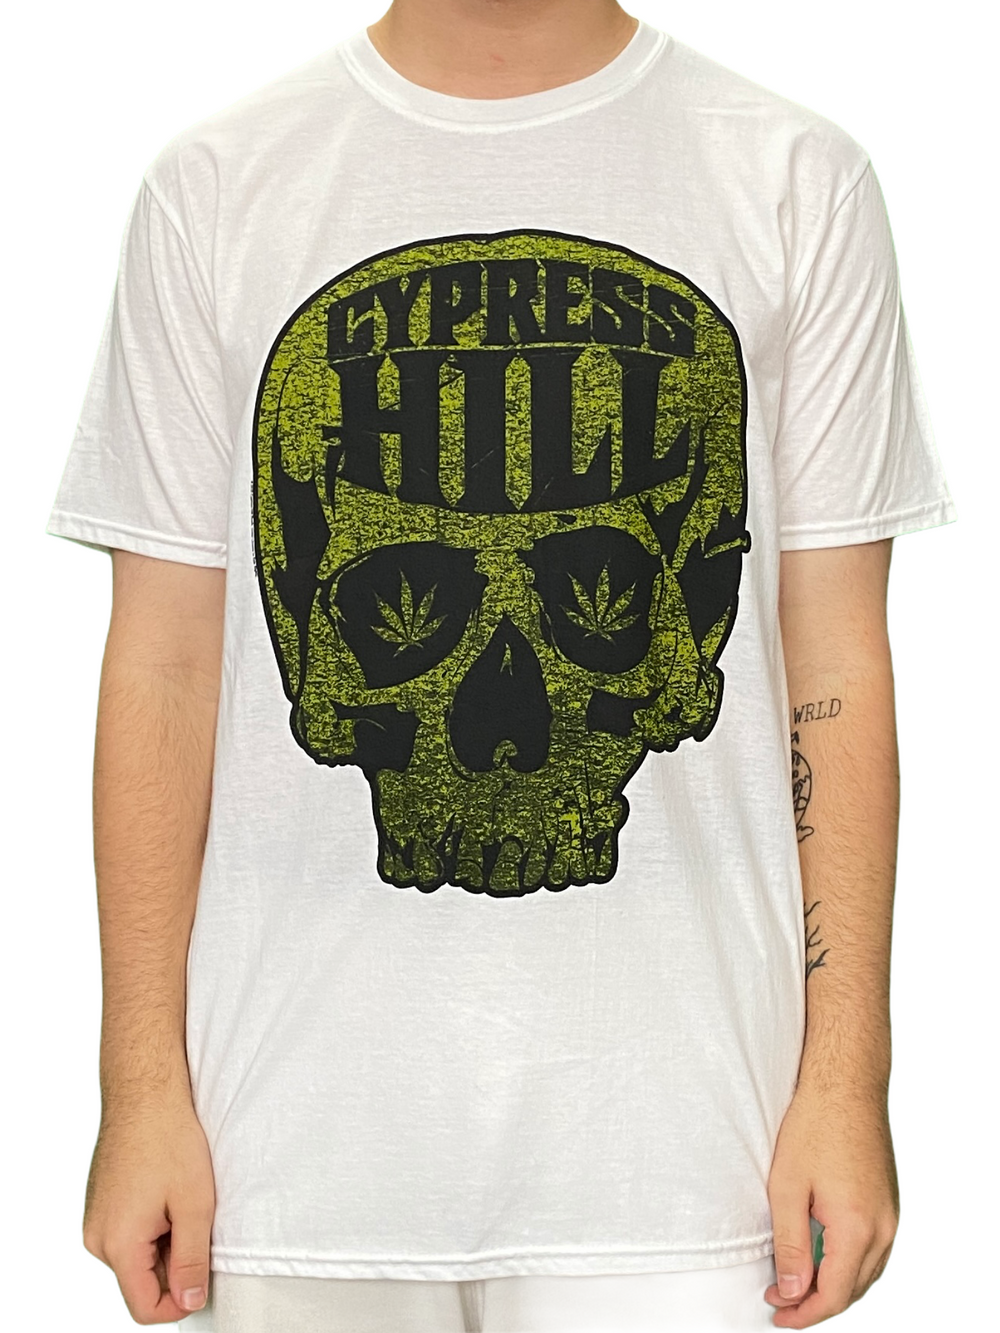 Cypress Hill Skull Unisex Official T Shirt Brand New Various Sizes